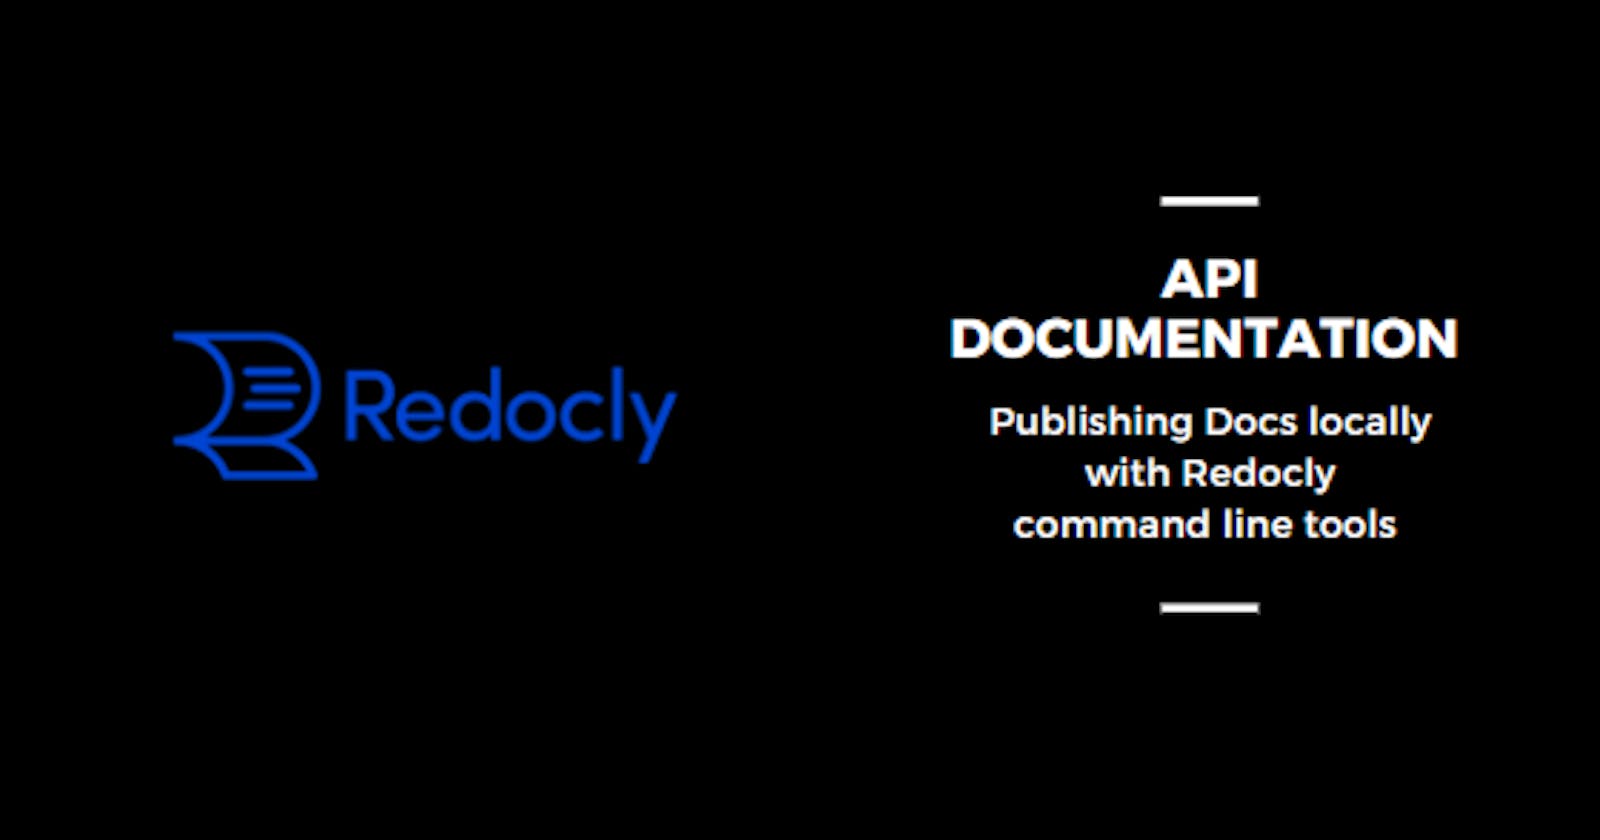 API Documentation: Publishing Docs locally with Redocly command-line tools